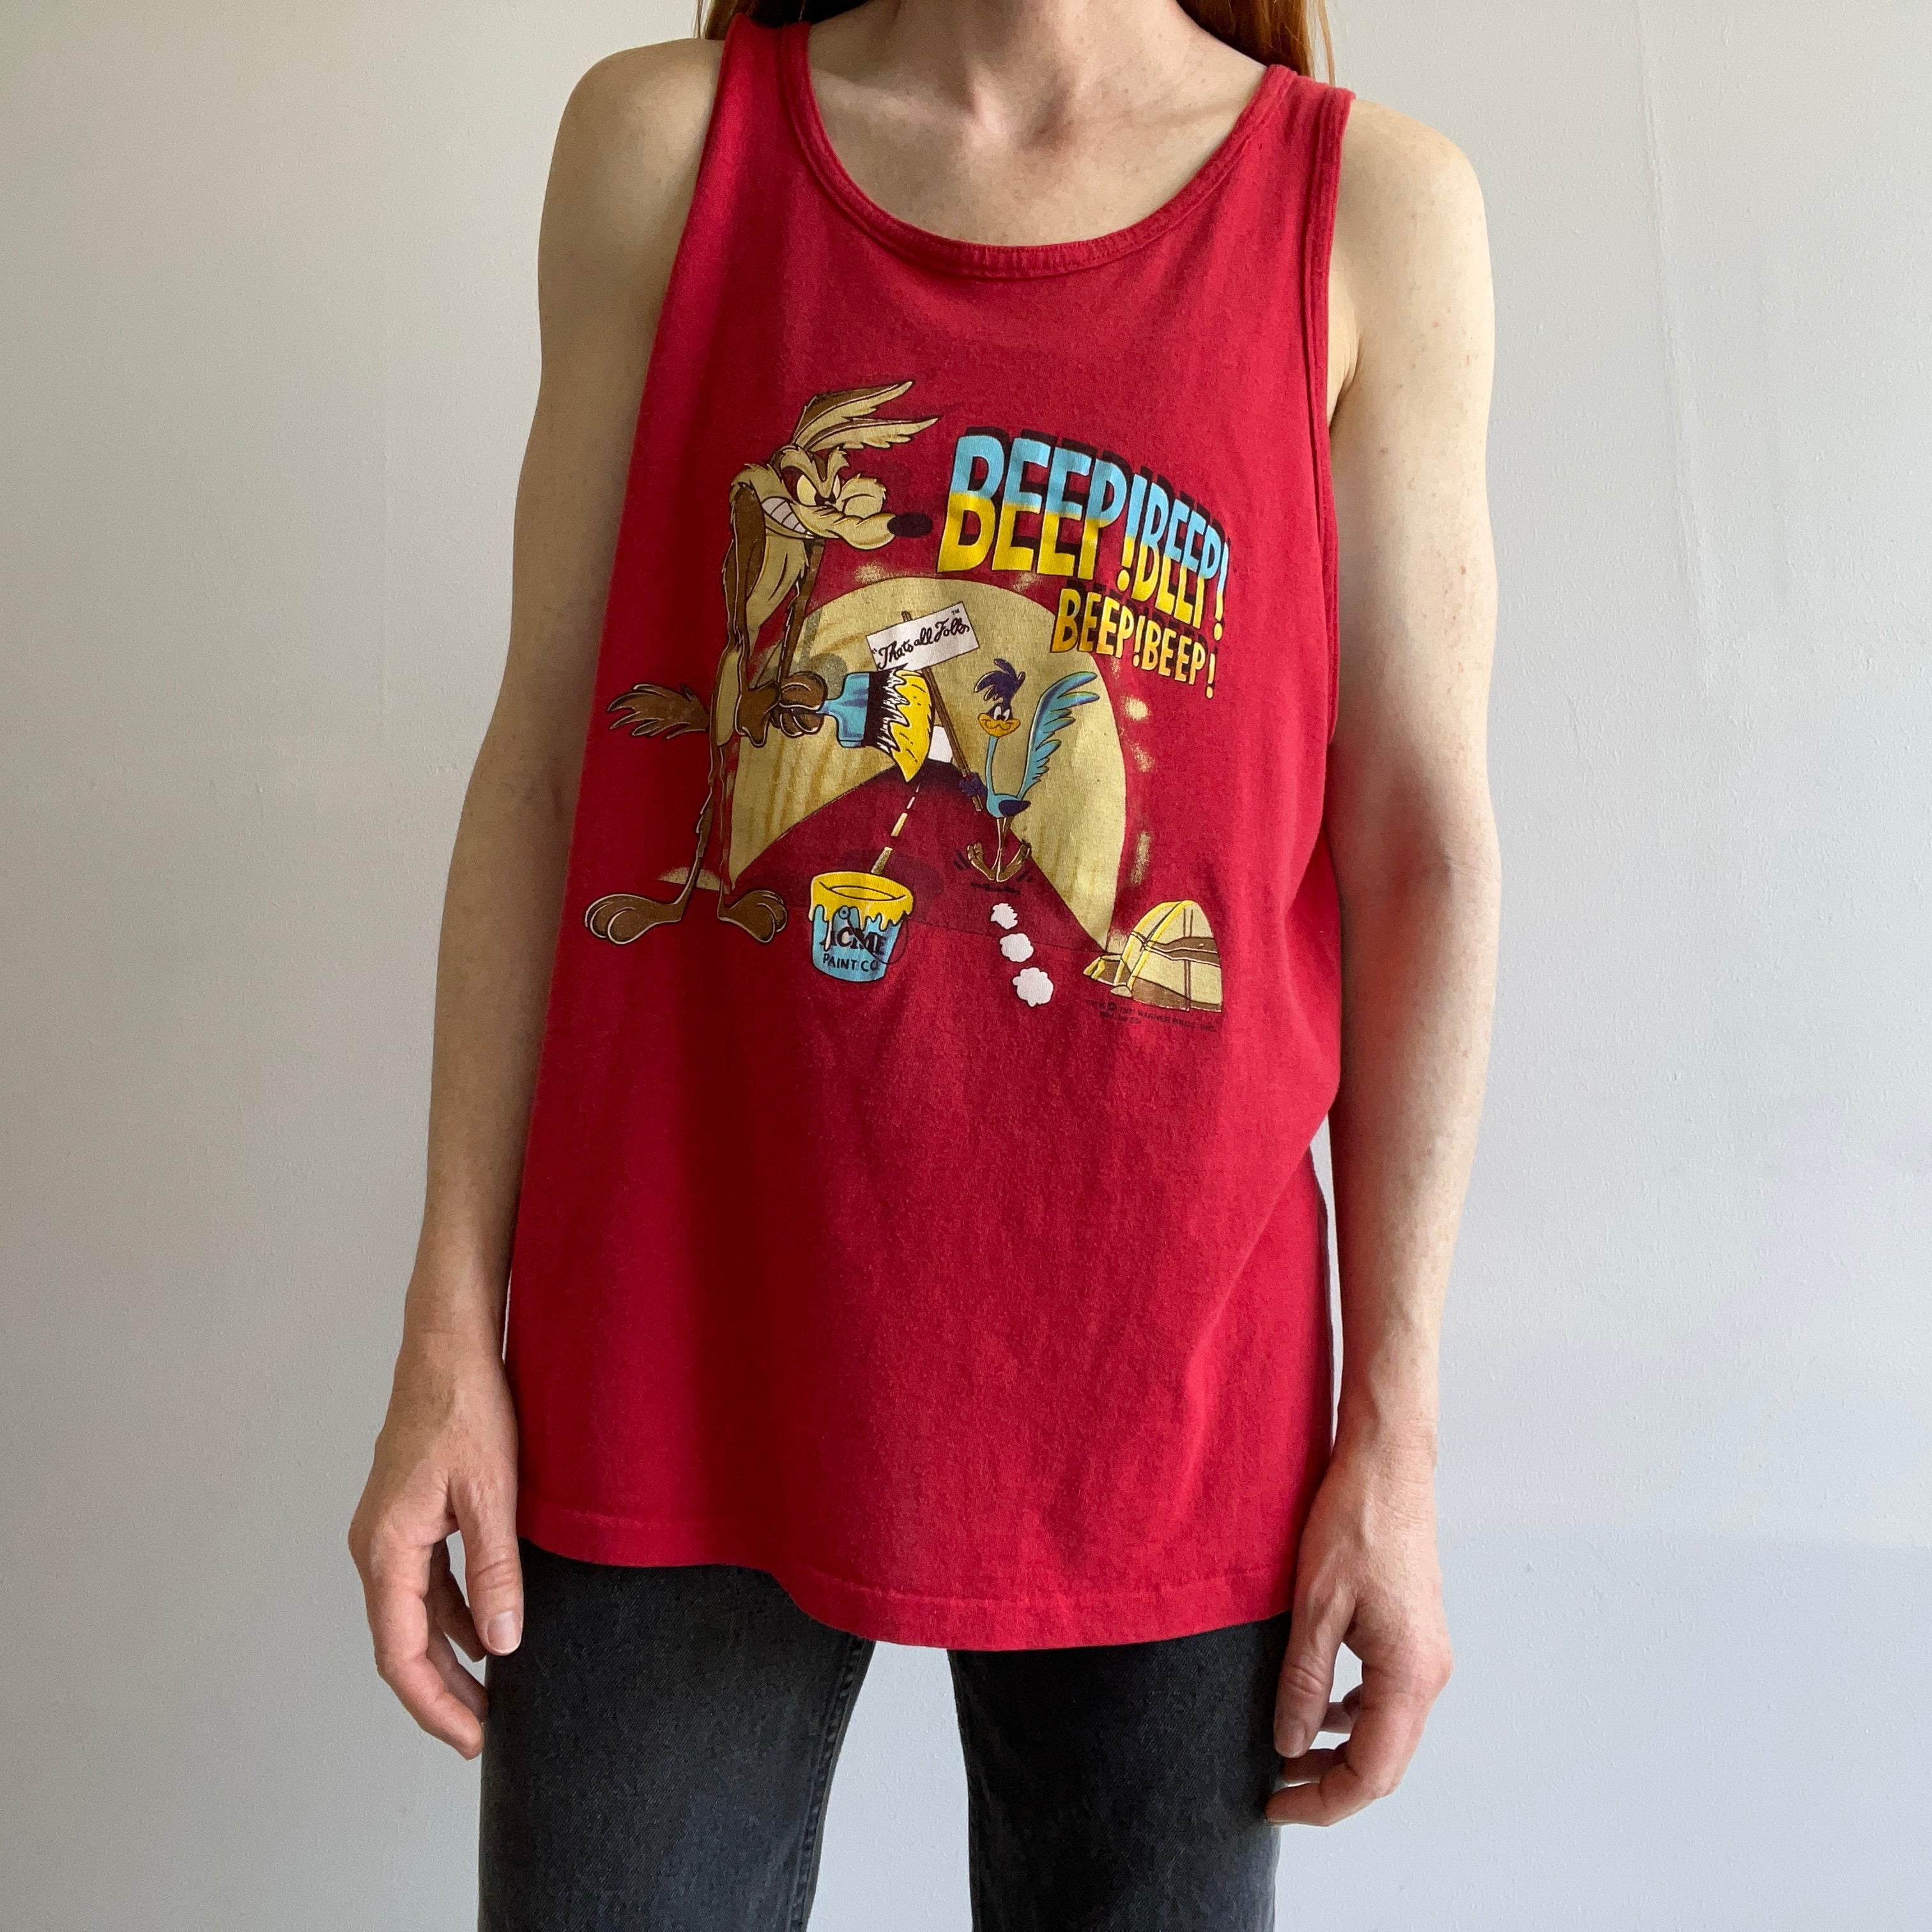 1991 Road Runner and Wile E. Coyote Tank Top